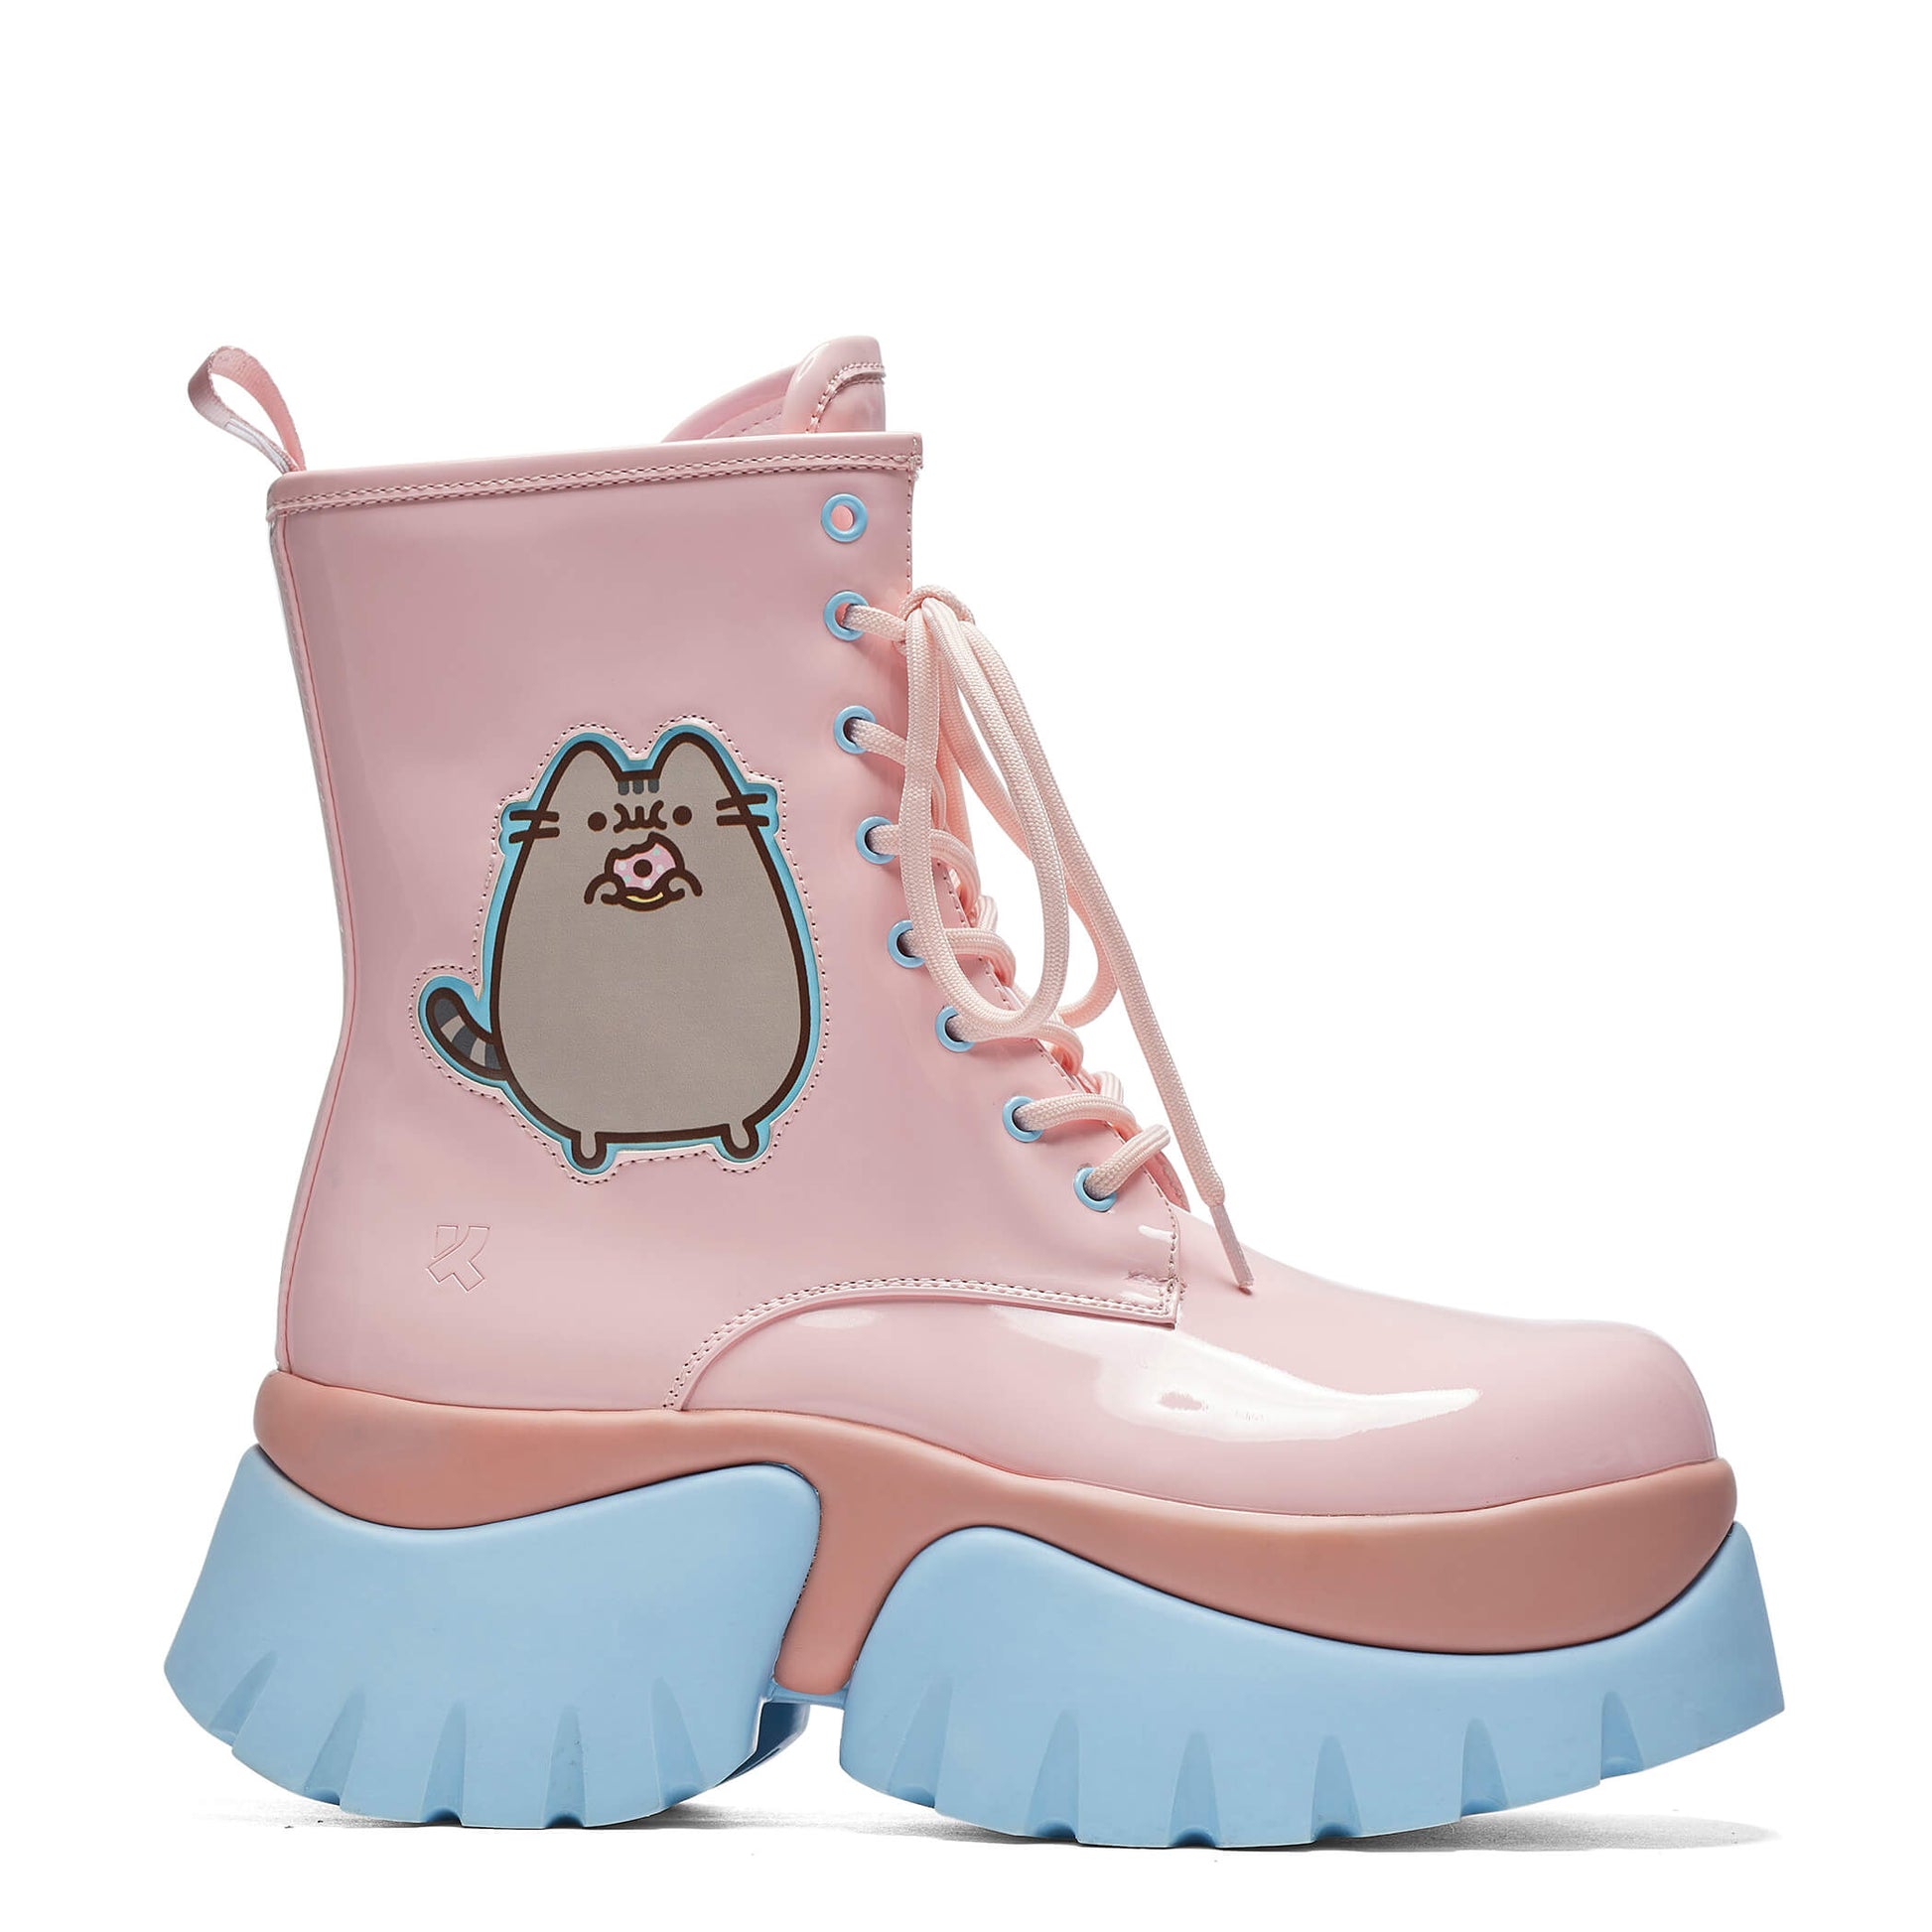 Pusheen Doughnuts Pastel Patent Boots - Ankle Boots - KOI Footwear - Pink - Side View